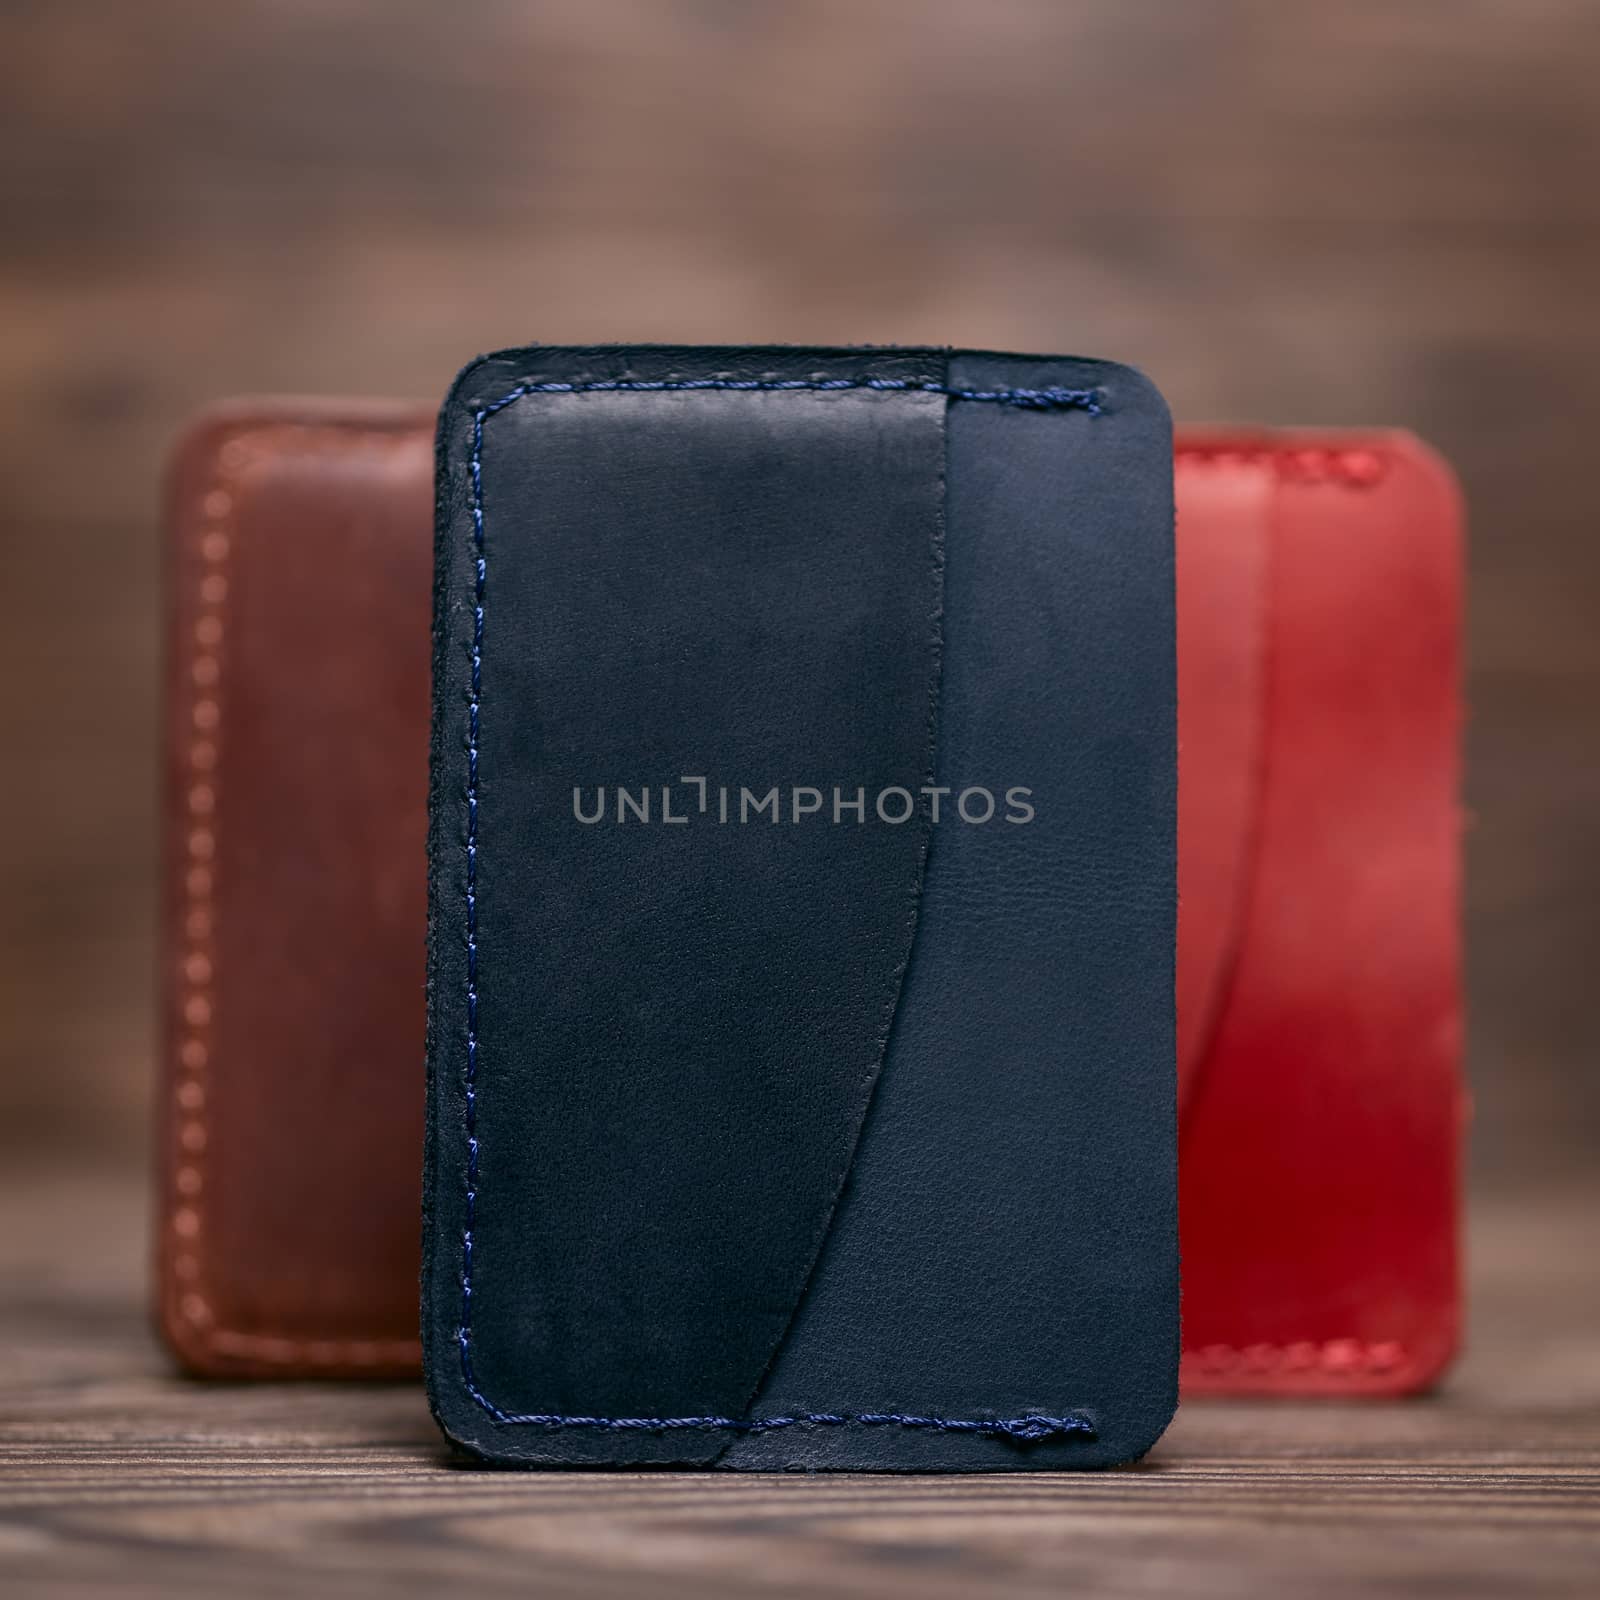 One pocket blue leather handmade cardholder. On blurred background stay other colour cardholders. Stock photo on blurred background. by alexsdriver